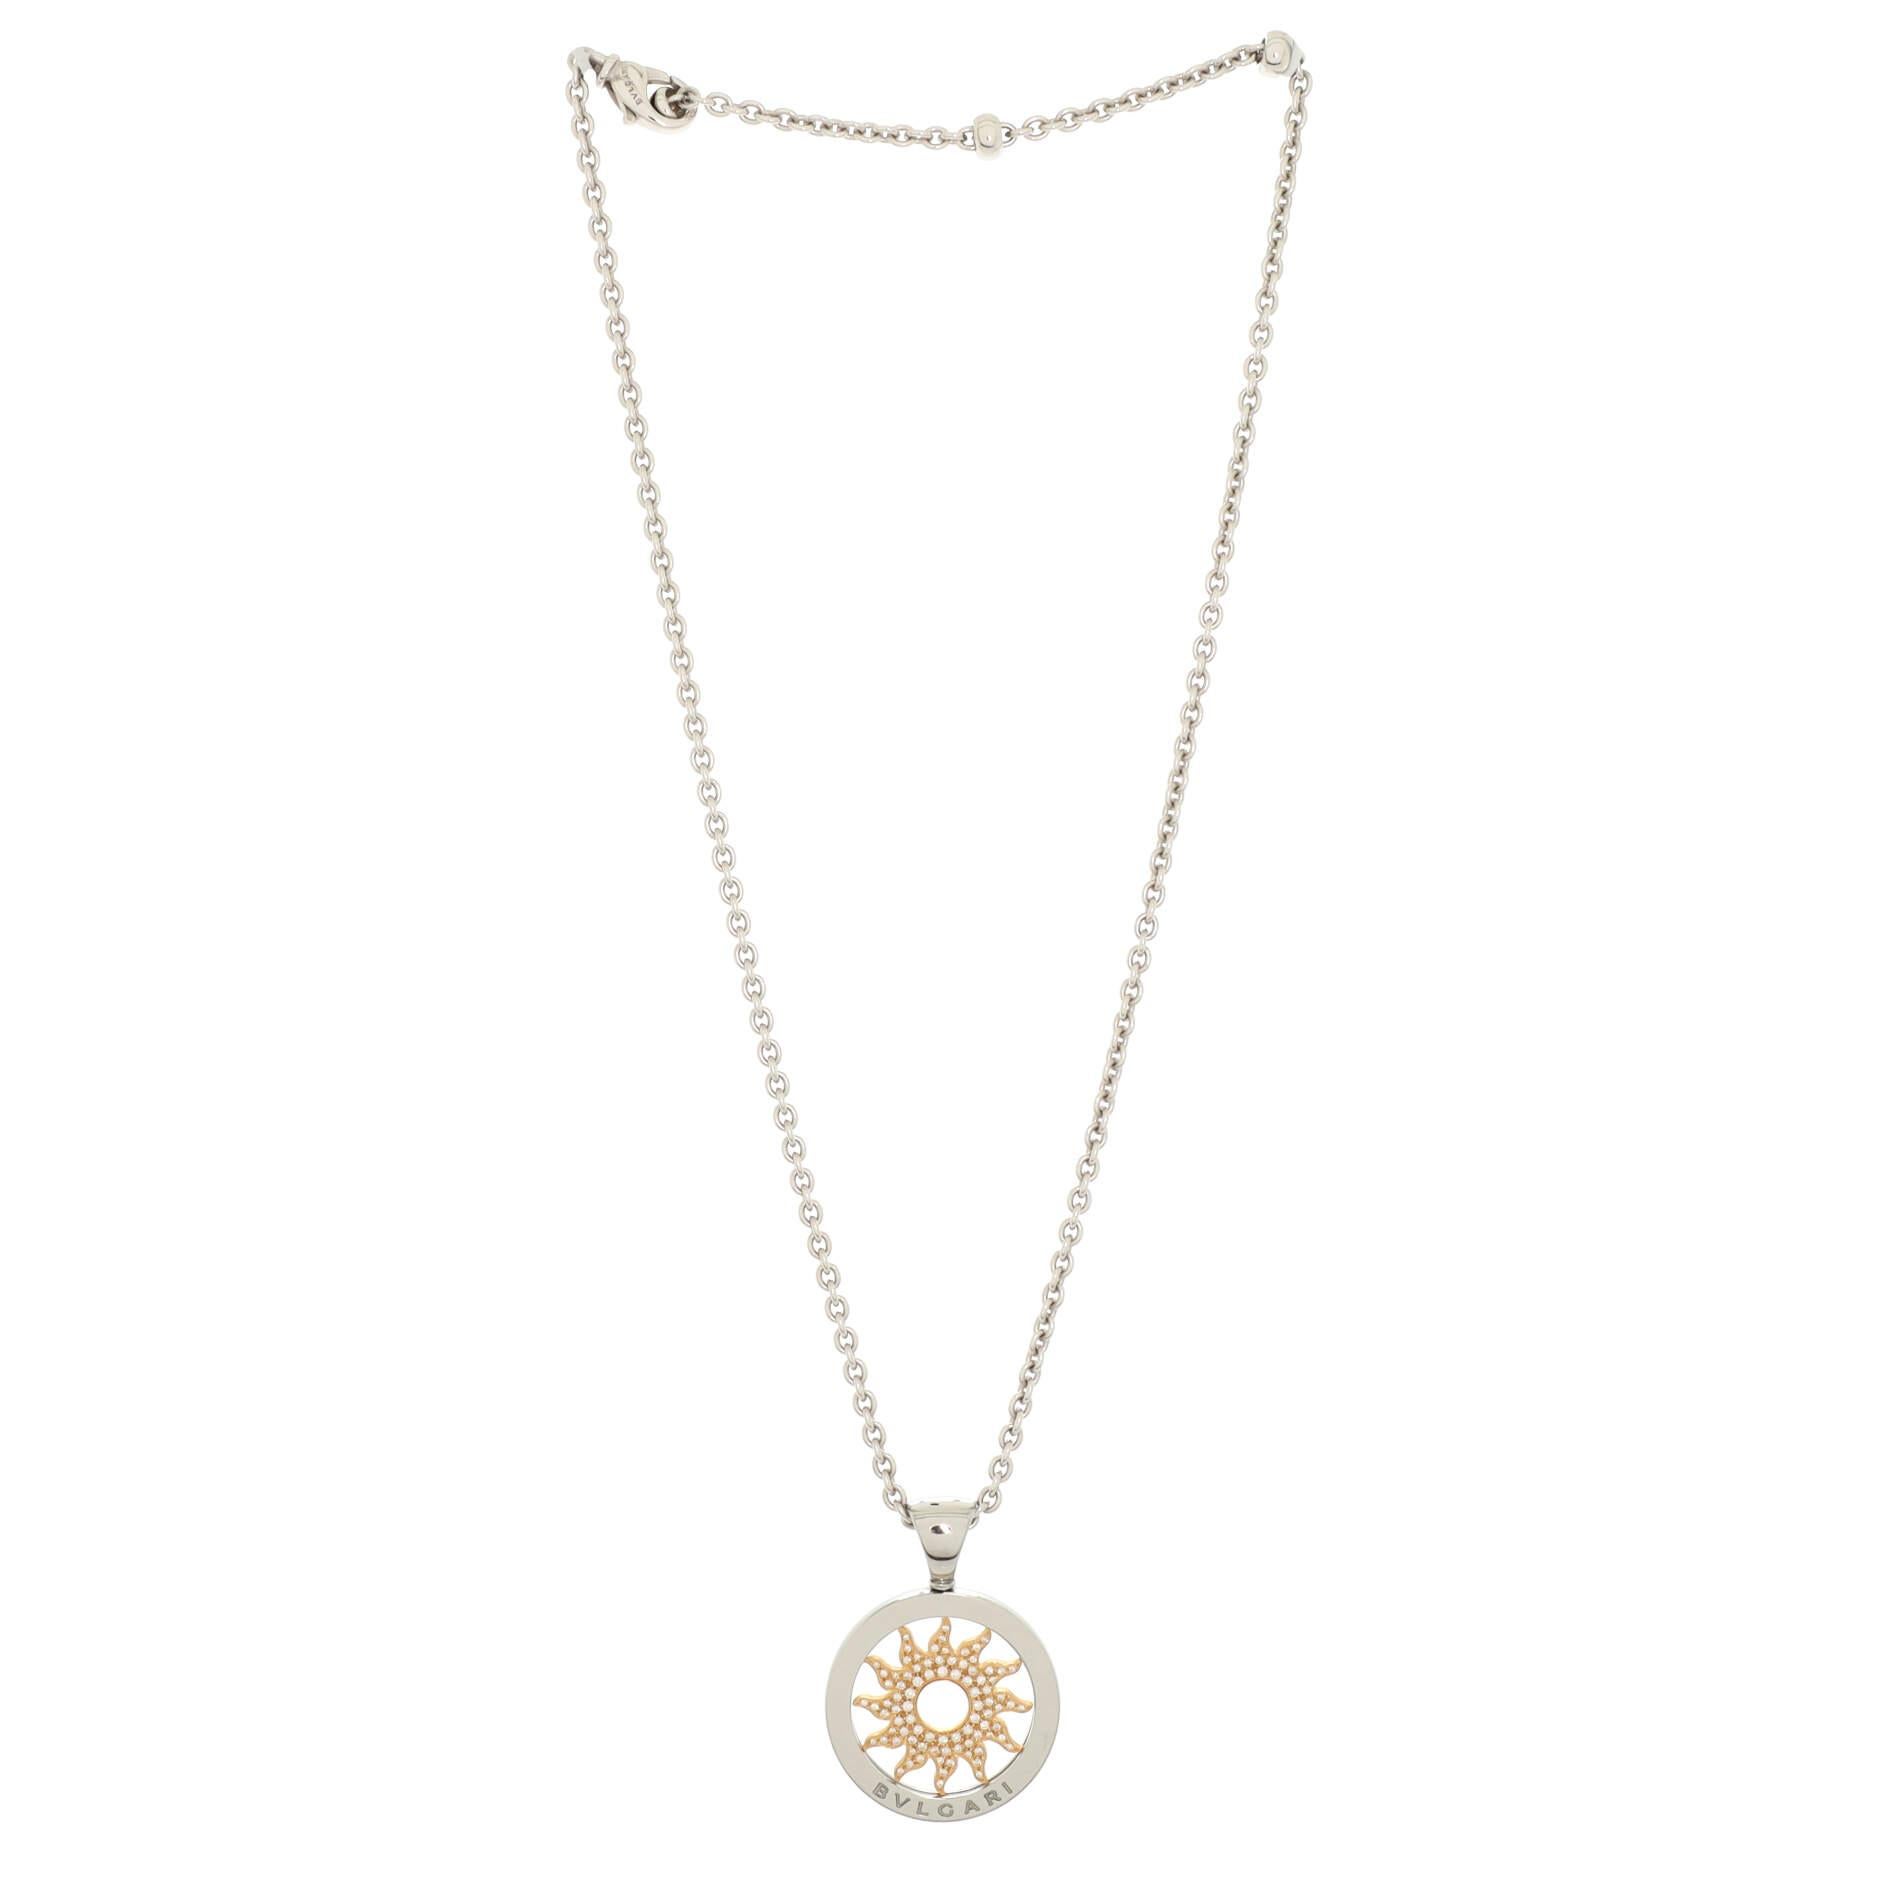 Bvlgari Tondo Sun Pendant Necklace 18K Yellow Gold and Stainless Steel wi In Good Condition For Sale In New York, NY